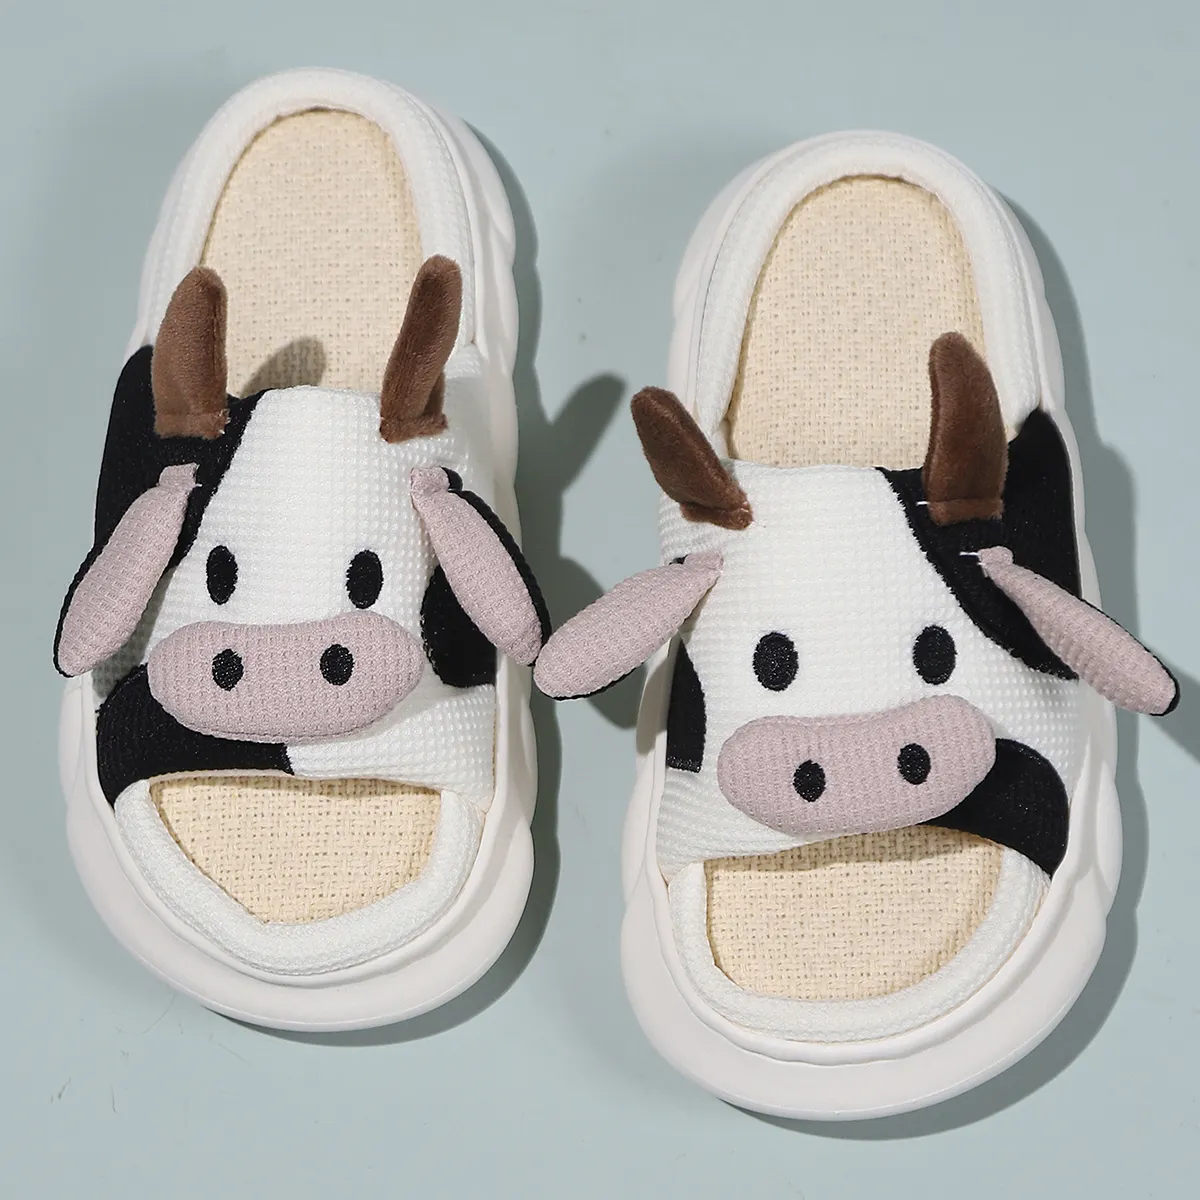 Cow Slippers for Women Fuzzy Cute Shoes Super Warm Soft Sole Non-slip Lightweight